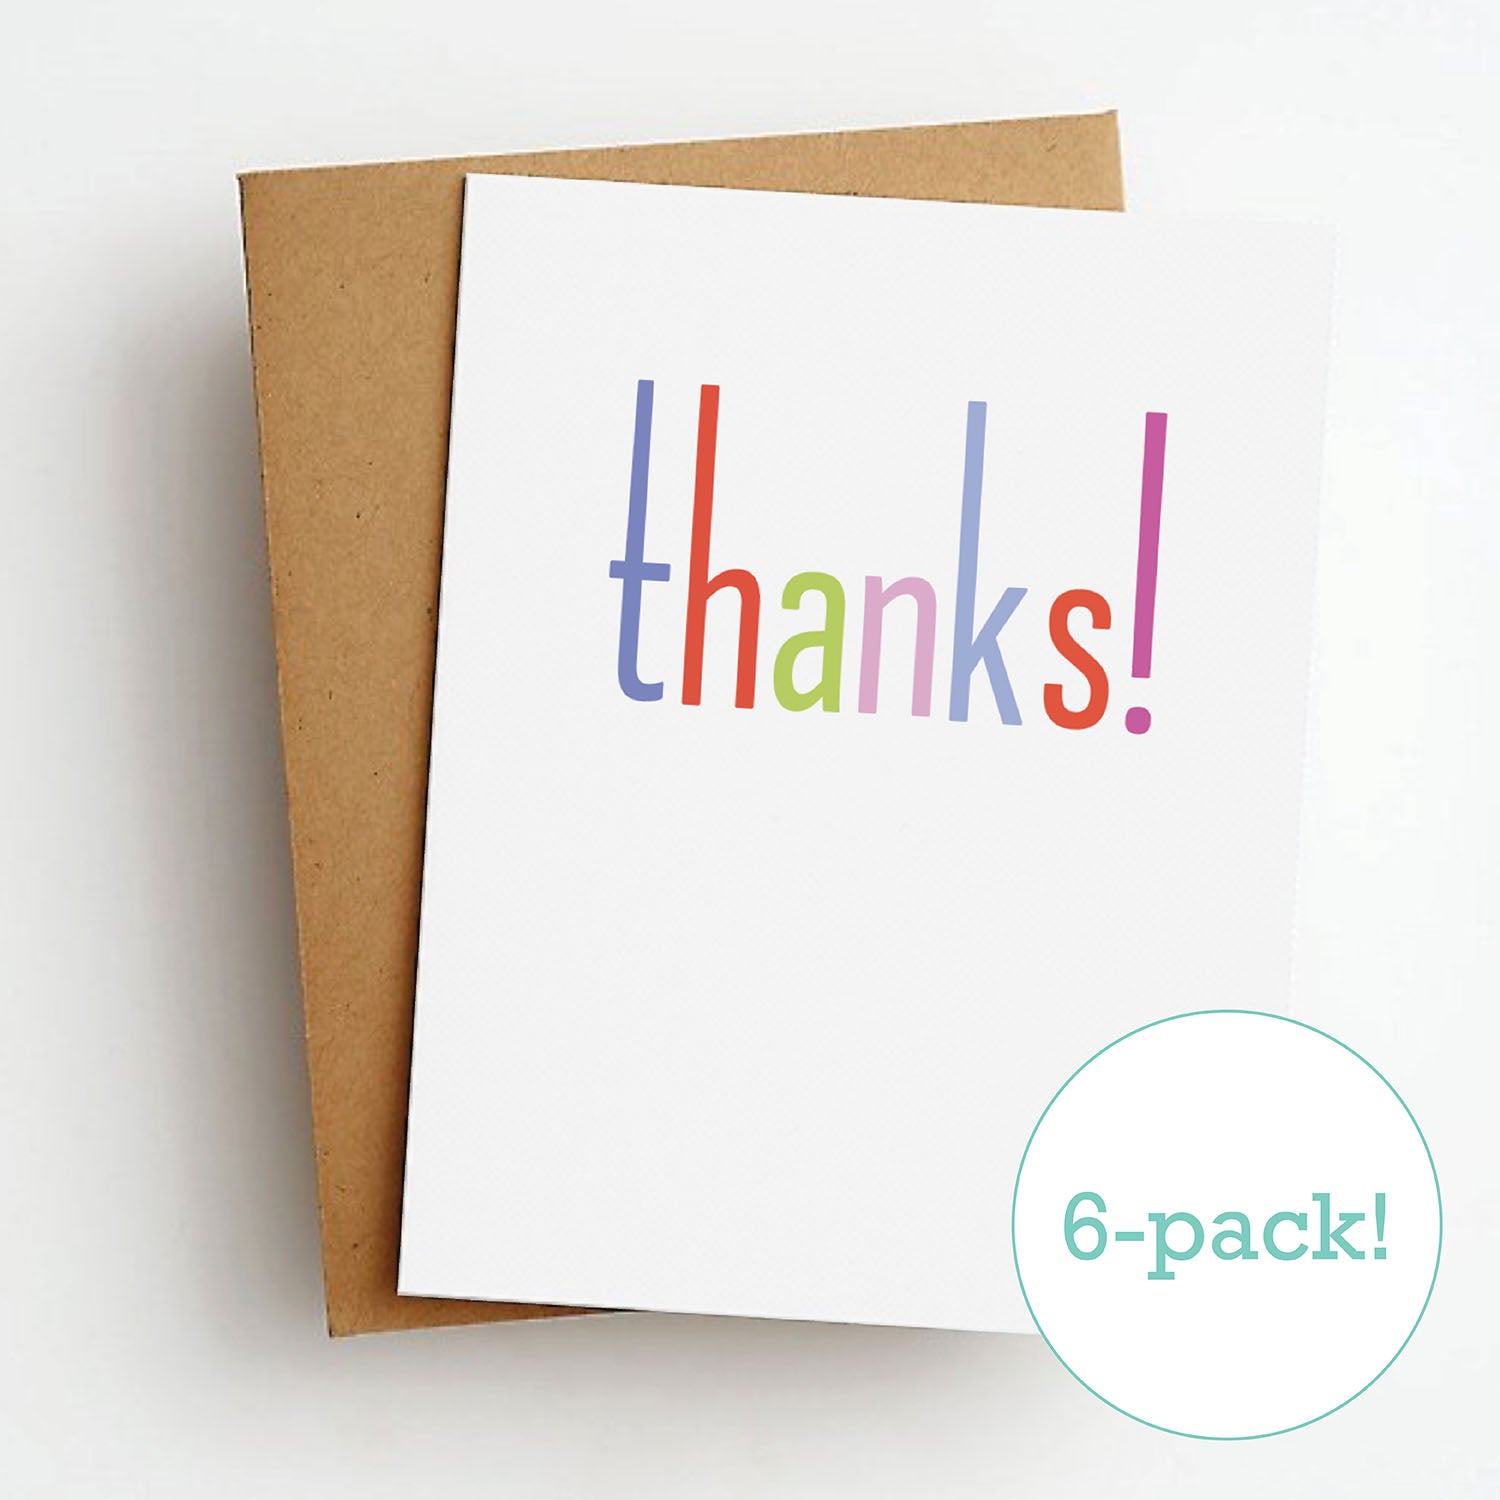 tall thanks cards (6-pack!)